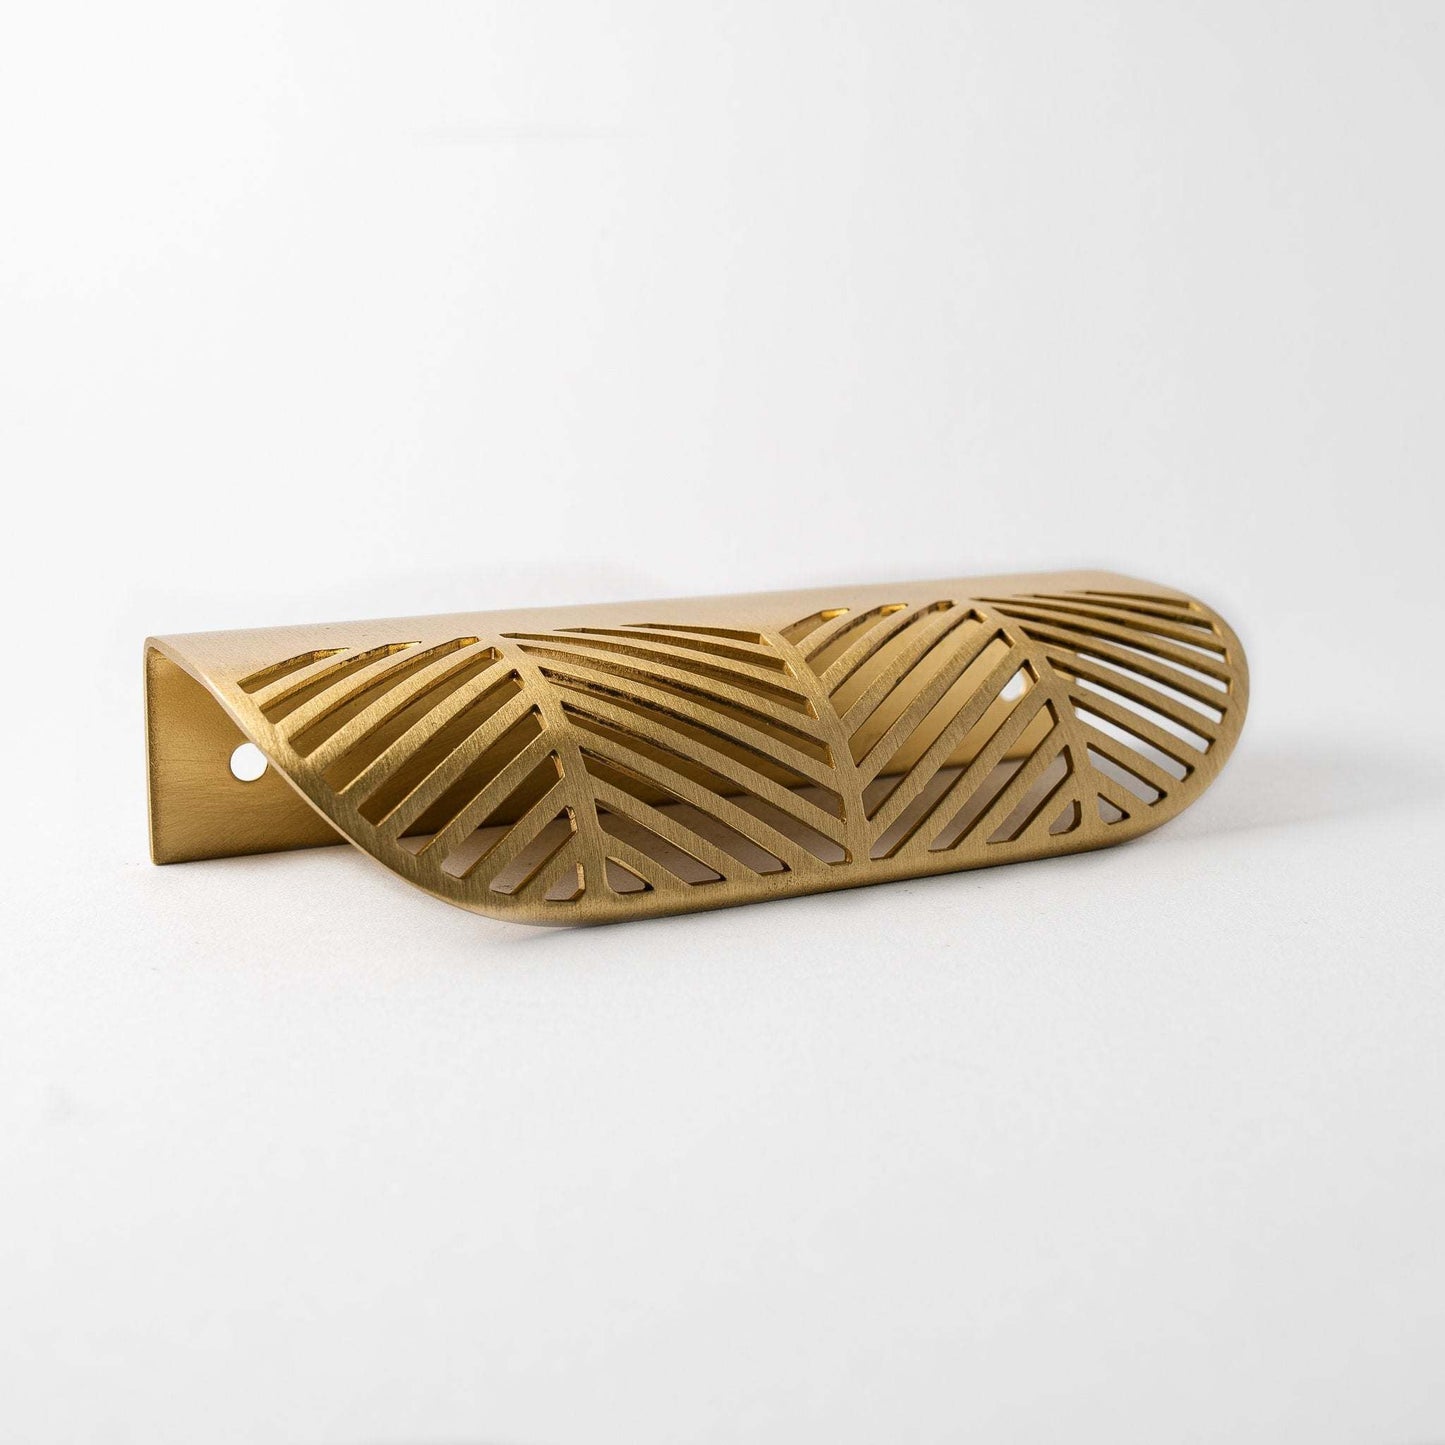 Frond, Solid Brass Edge Pulls


Frond Pull is a favorite on cabinetry in baths, laundry rooms and furniture pieces. Available in two sizes, this drawer pull offers a feminine touch and timeless pullFrond, Solid Brass Edge Pulls